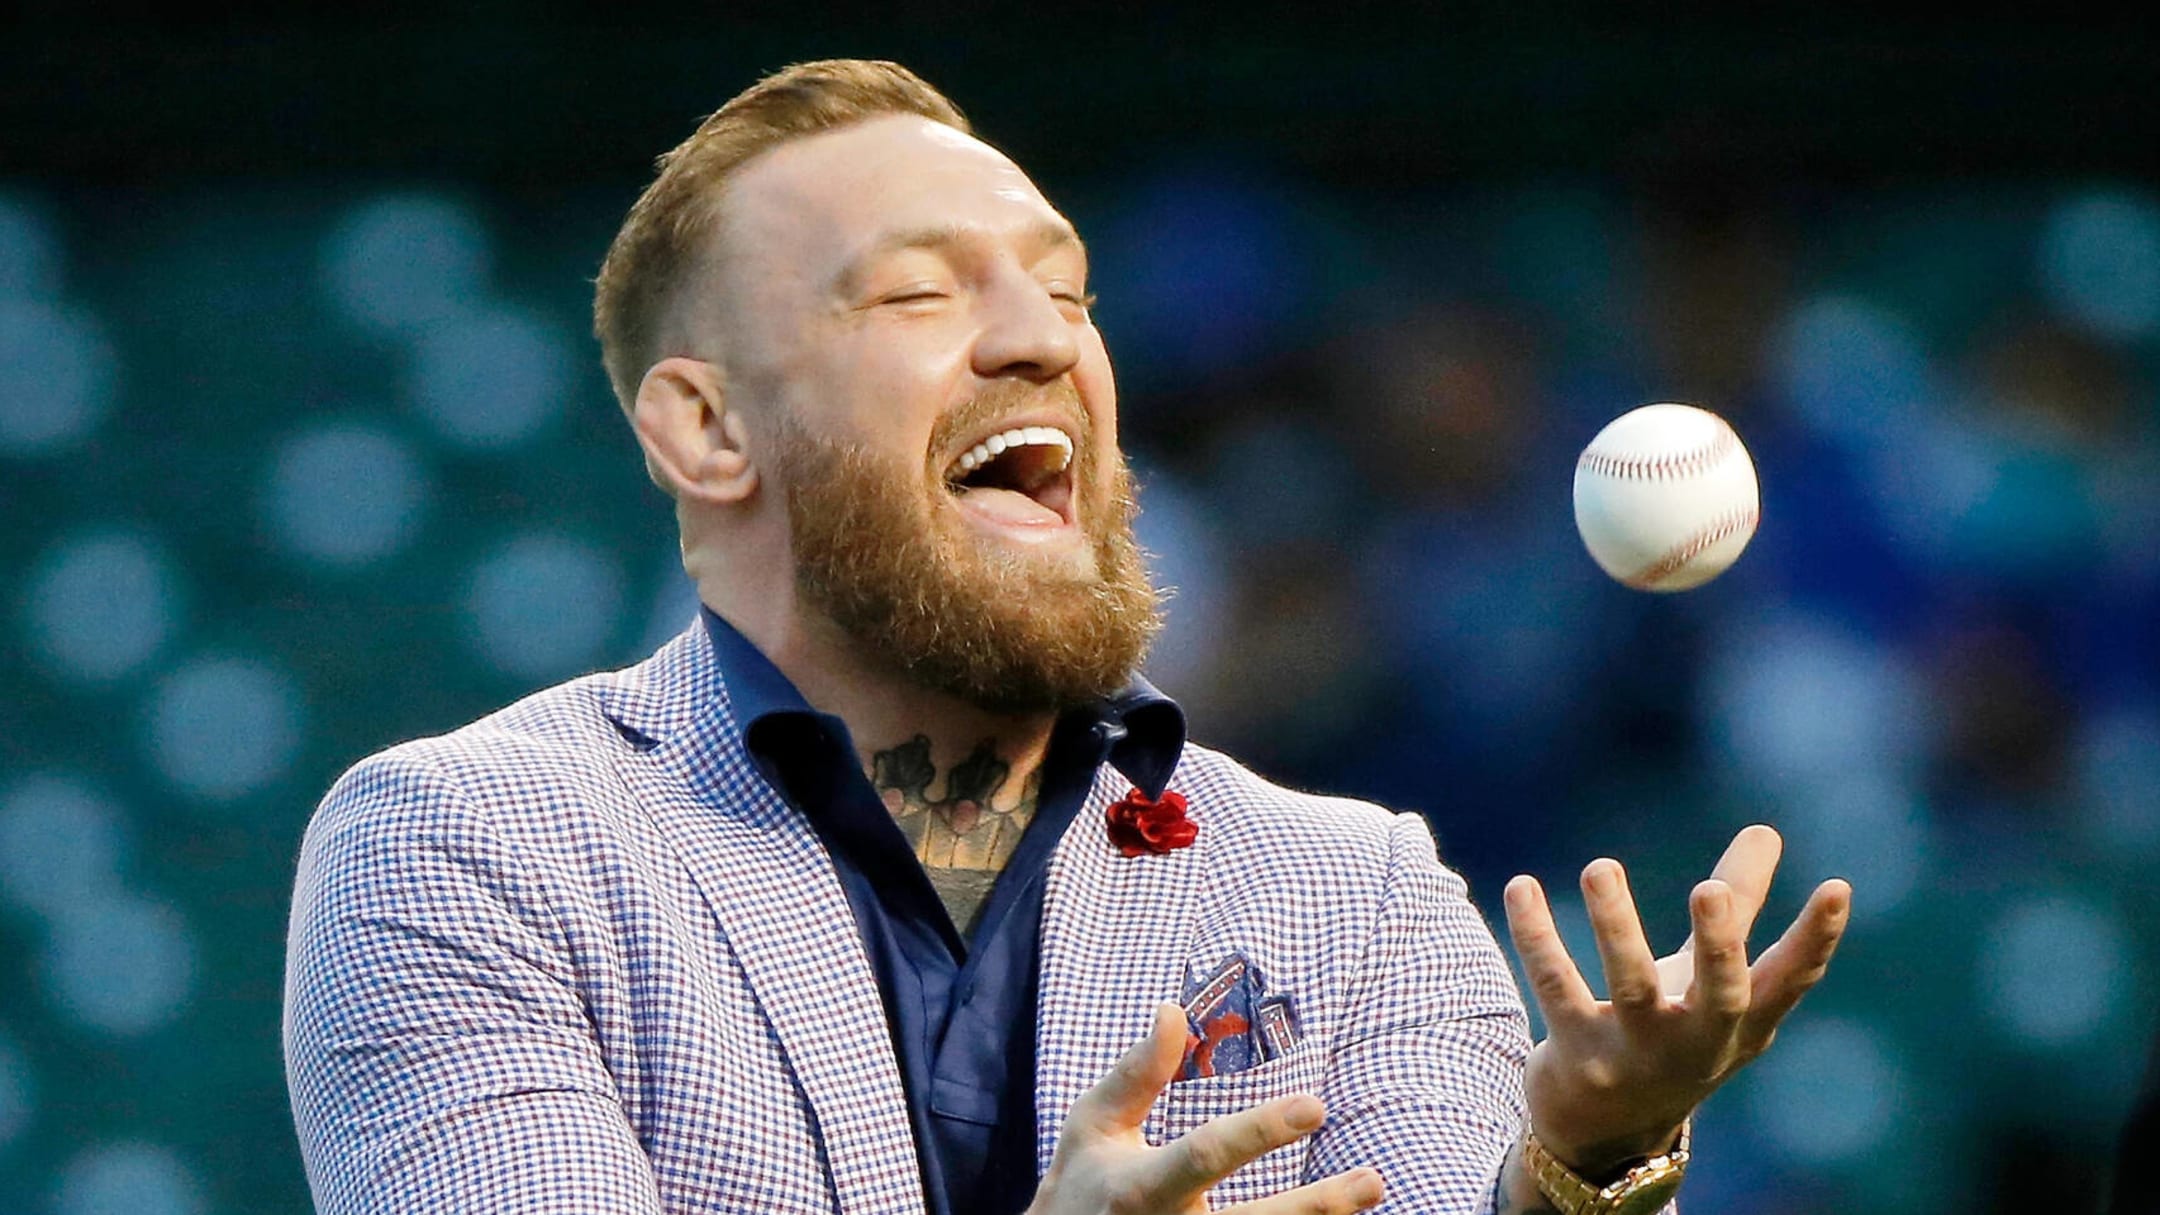 Conor McGregor Faces Off with Mike Perry at Bare Knuckle Fighting  Championship